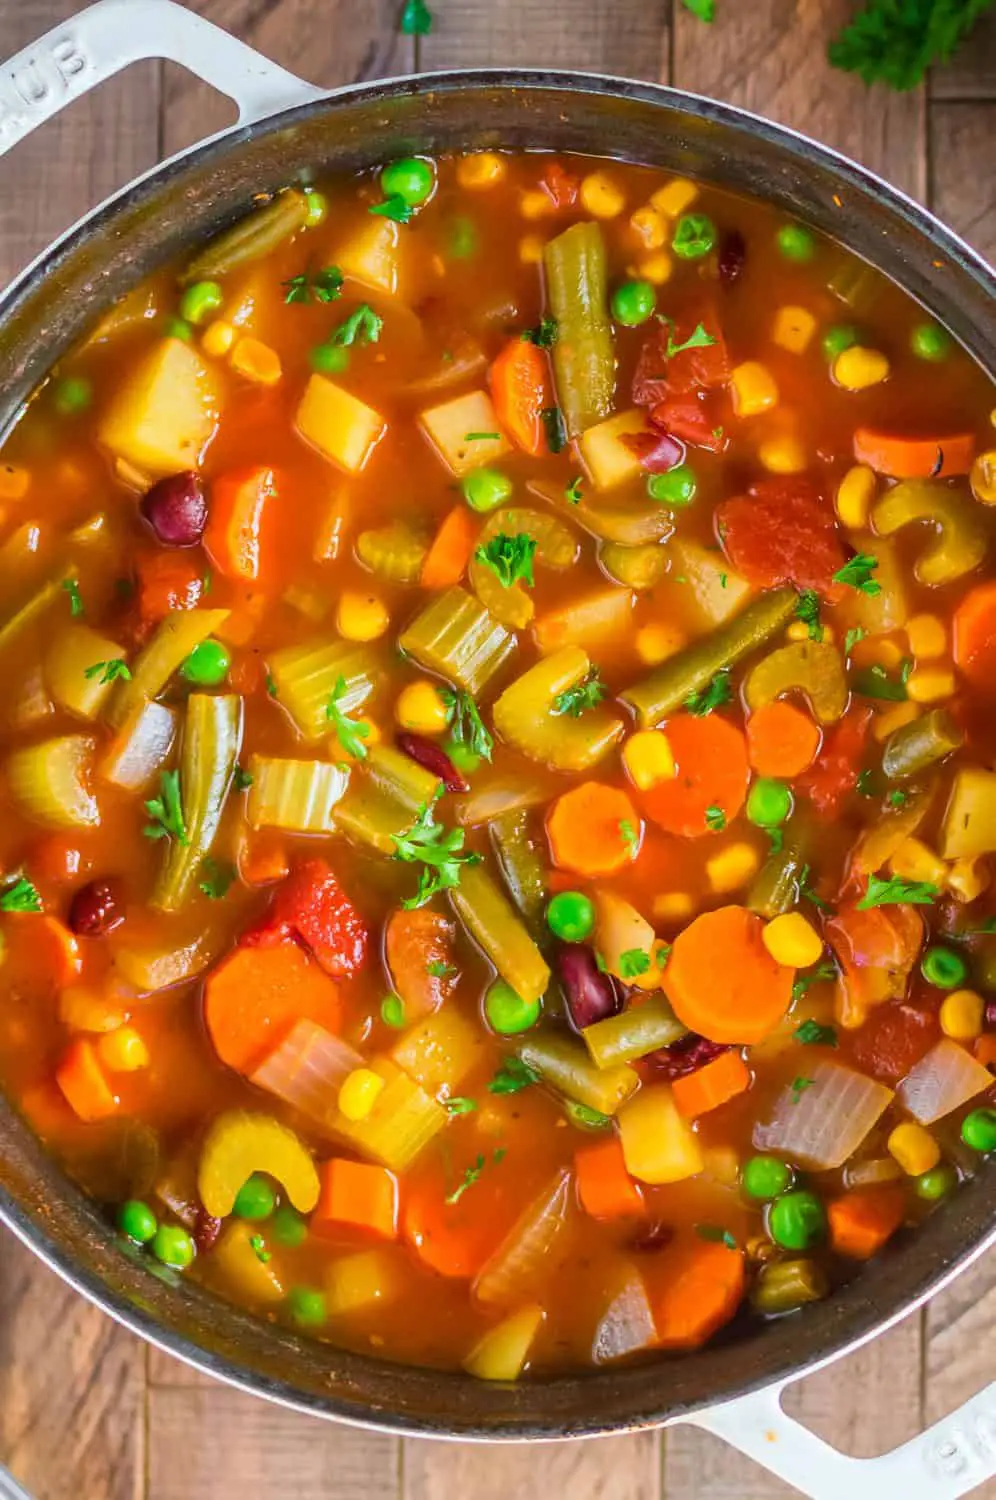 Easy Homemade Vegetable Soup | Healthy, Hearty, Simple Recipe